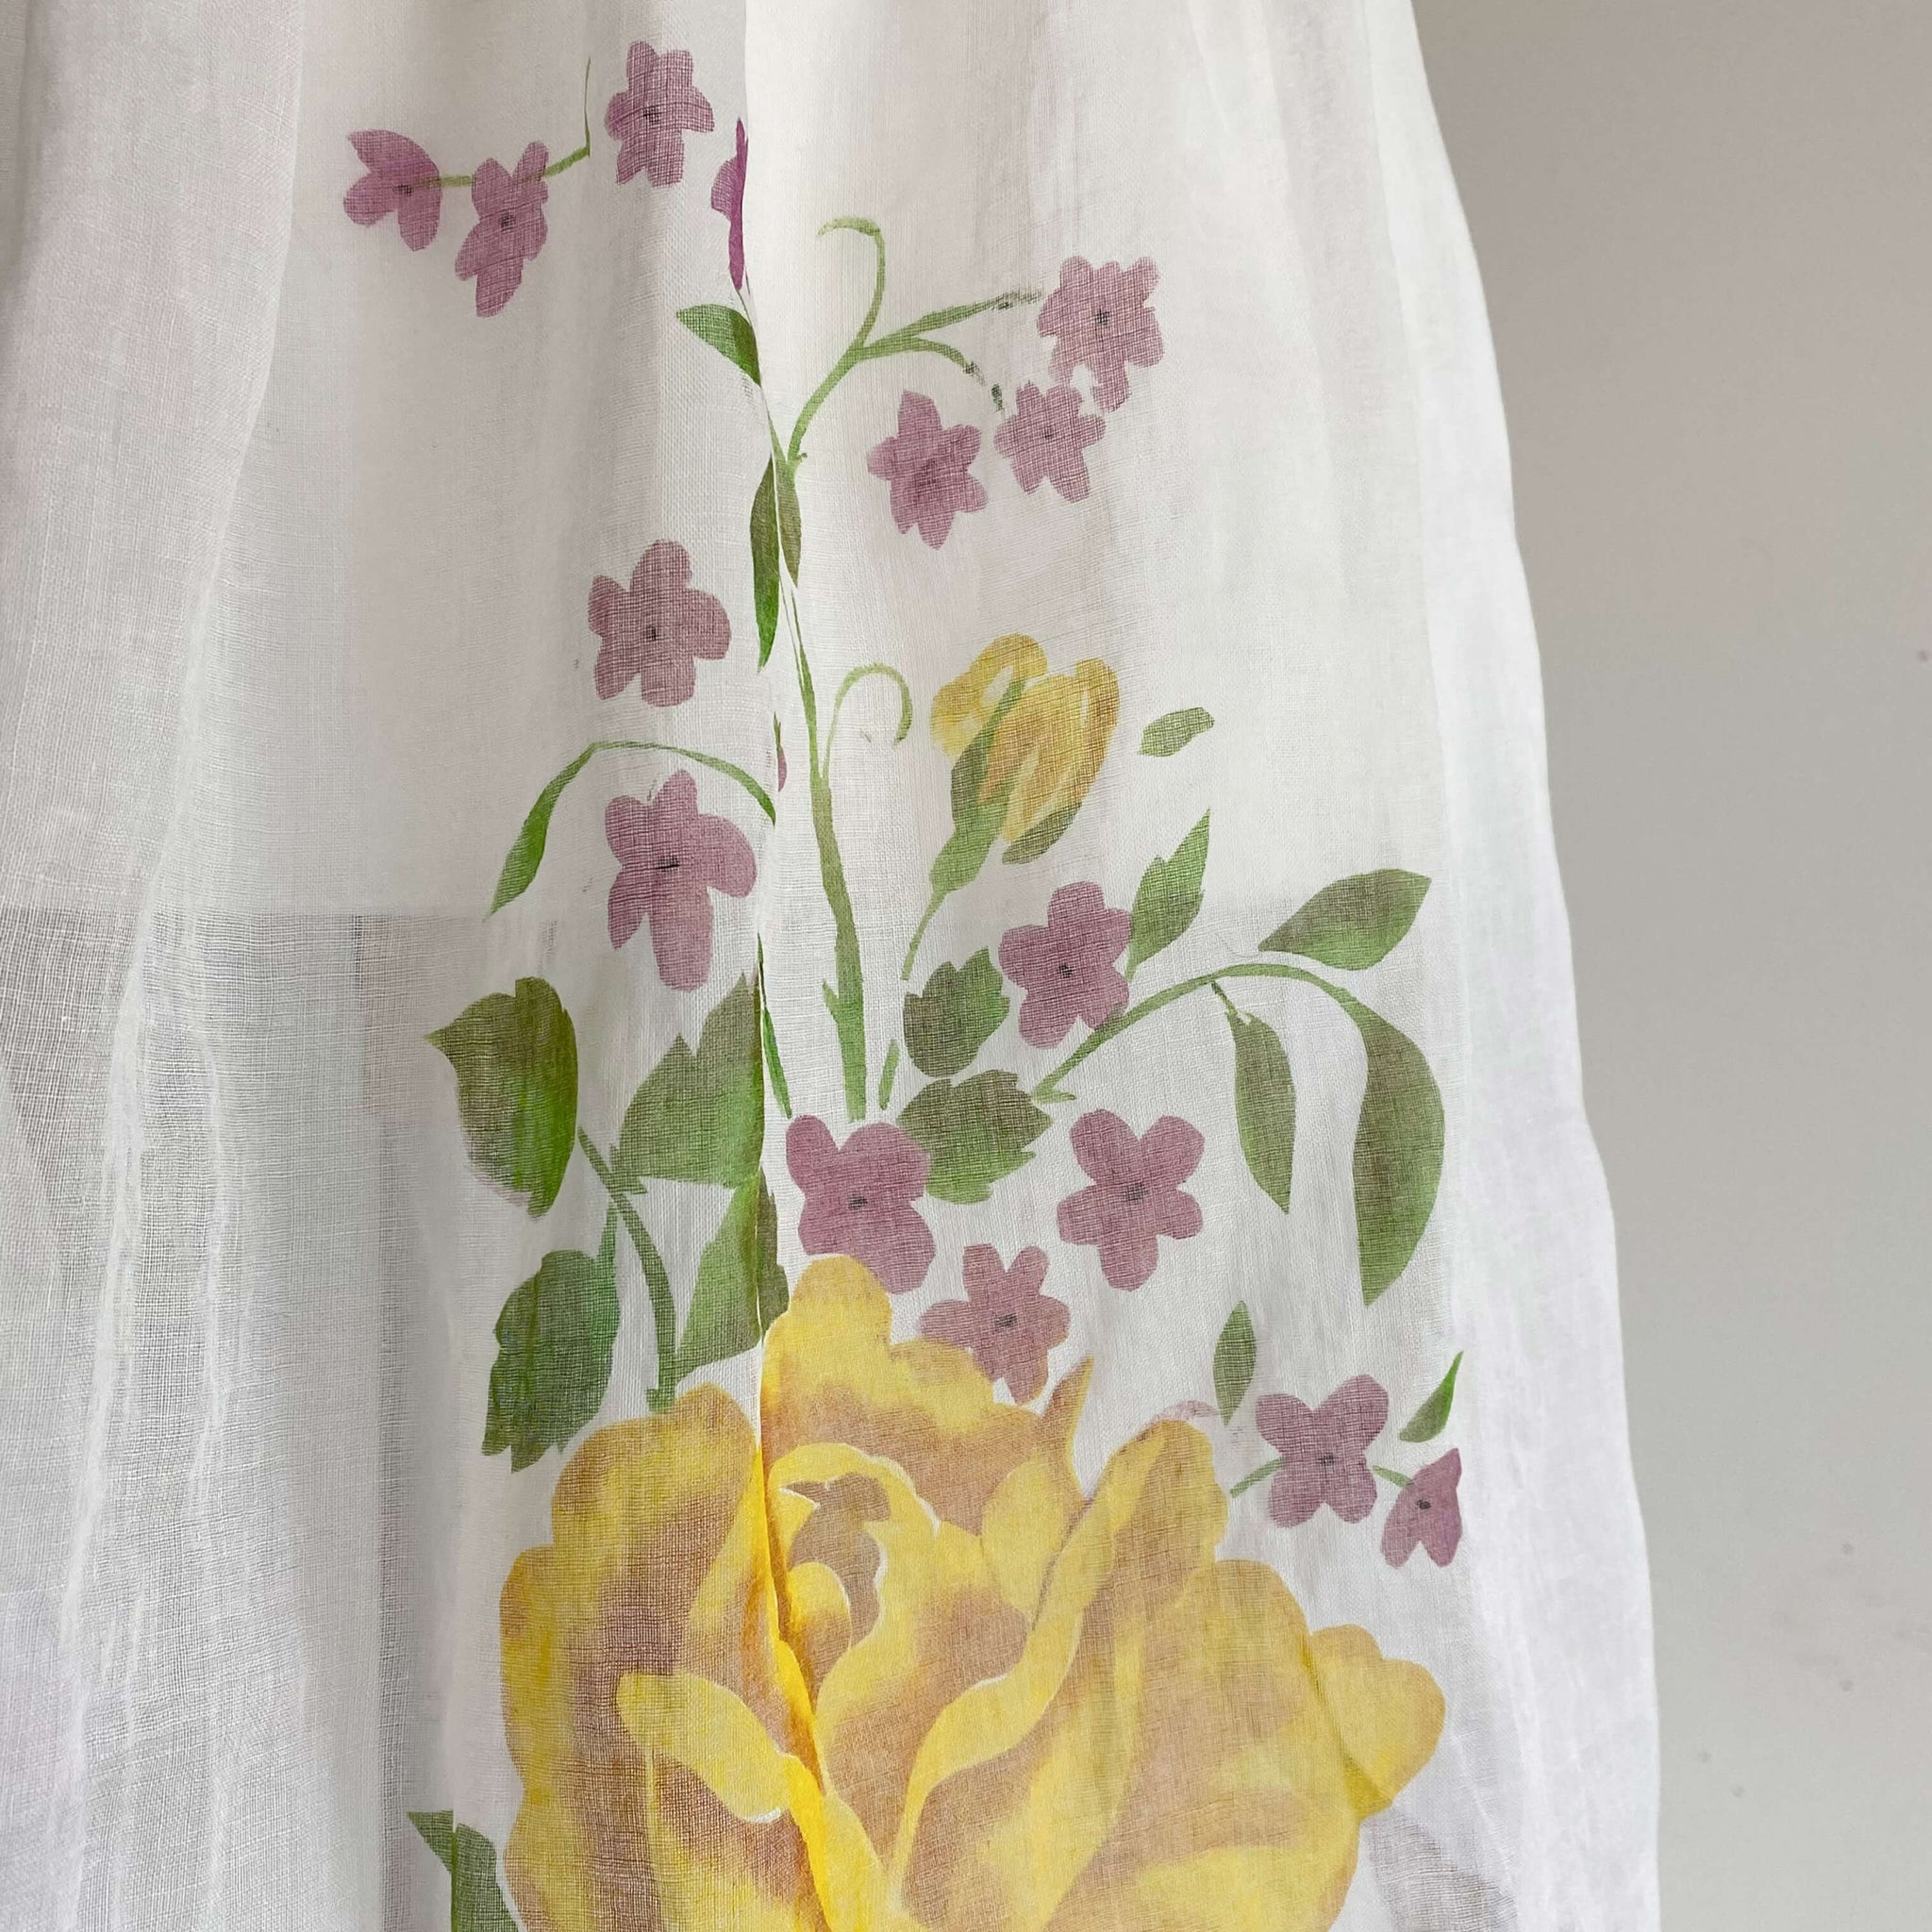 Vintage Organdy Half-Apron with Yellow Roses and Purple Flowers circa 1950s